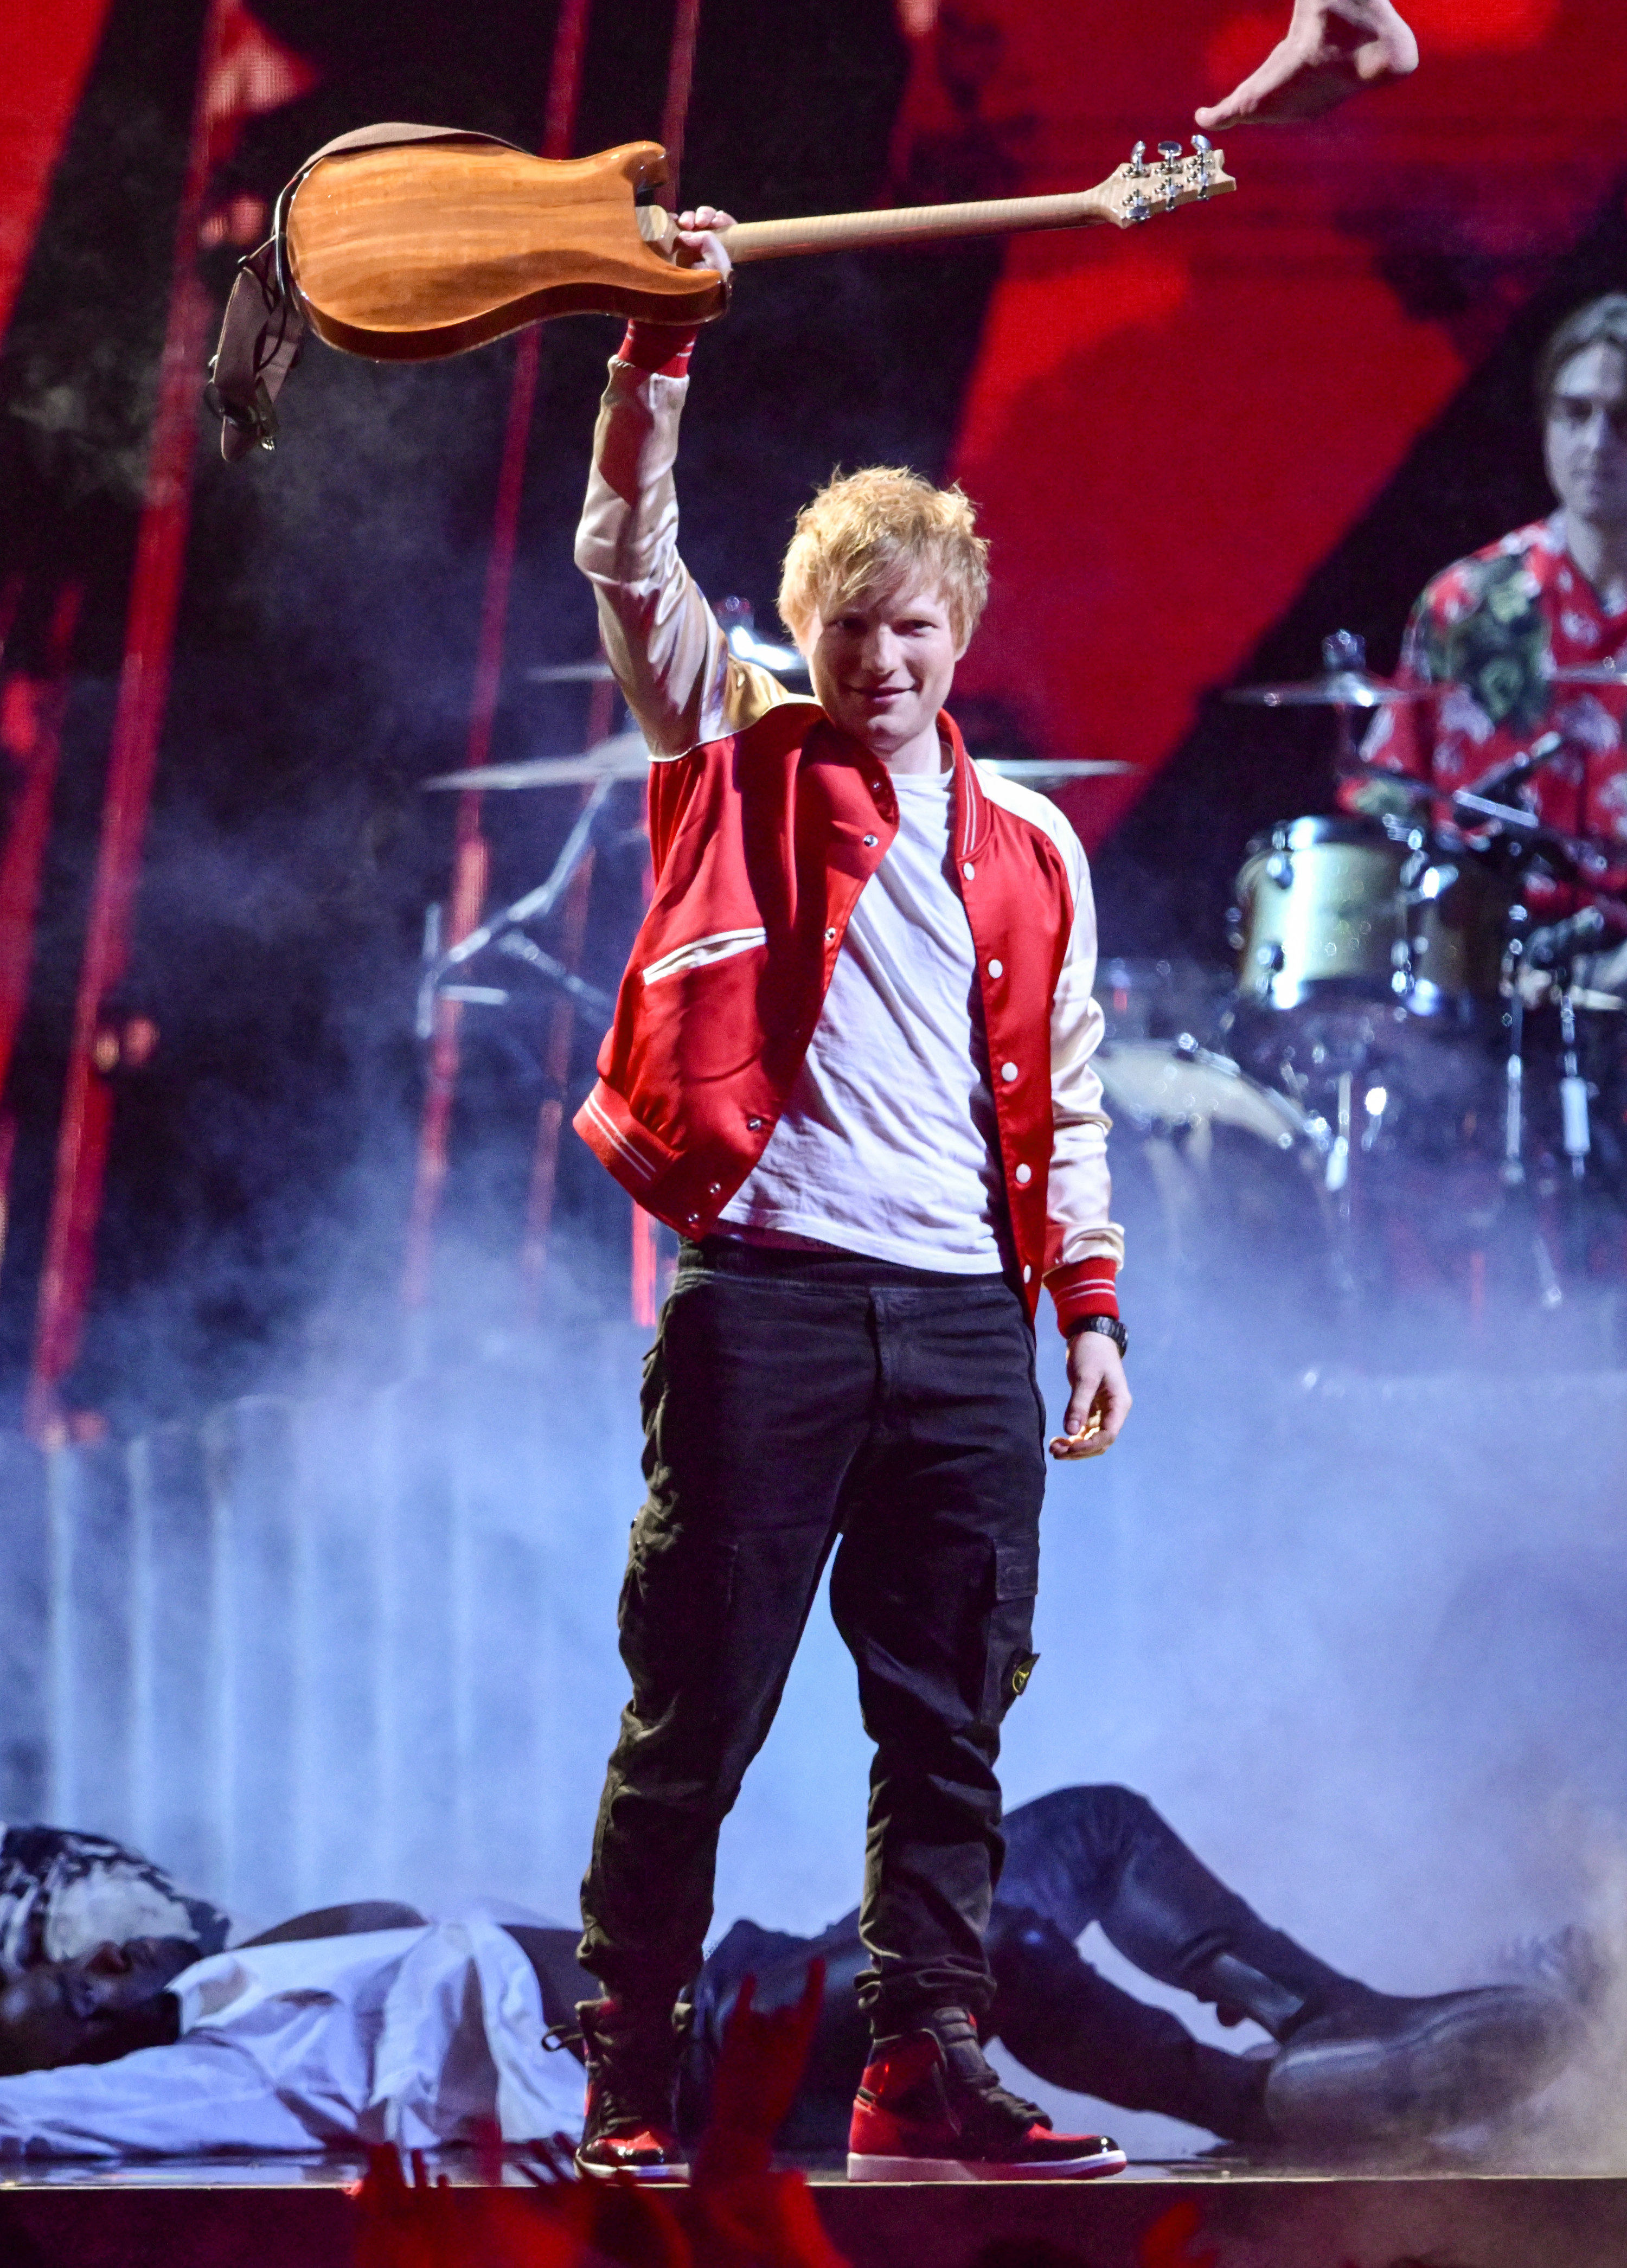 Ed wears a red letterman jacket and holds up his guitar